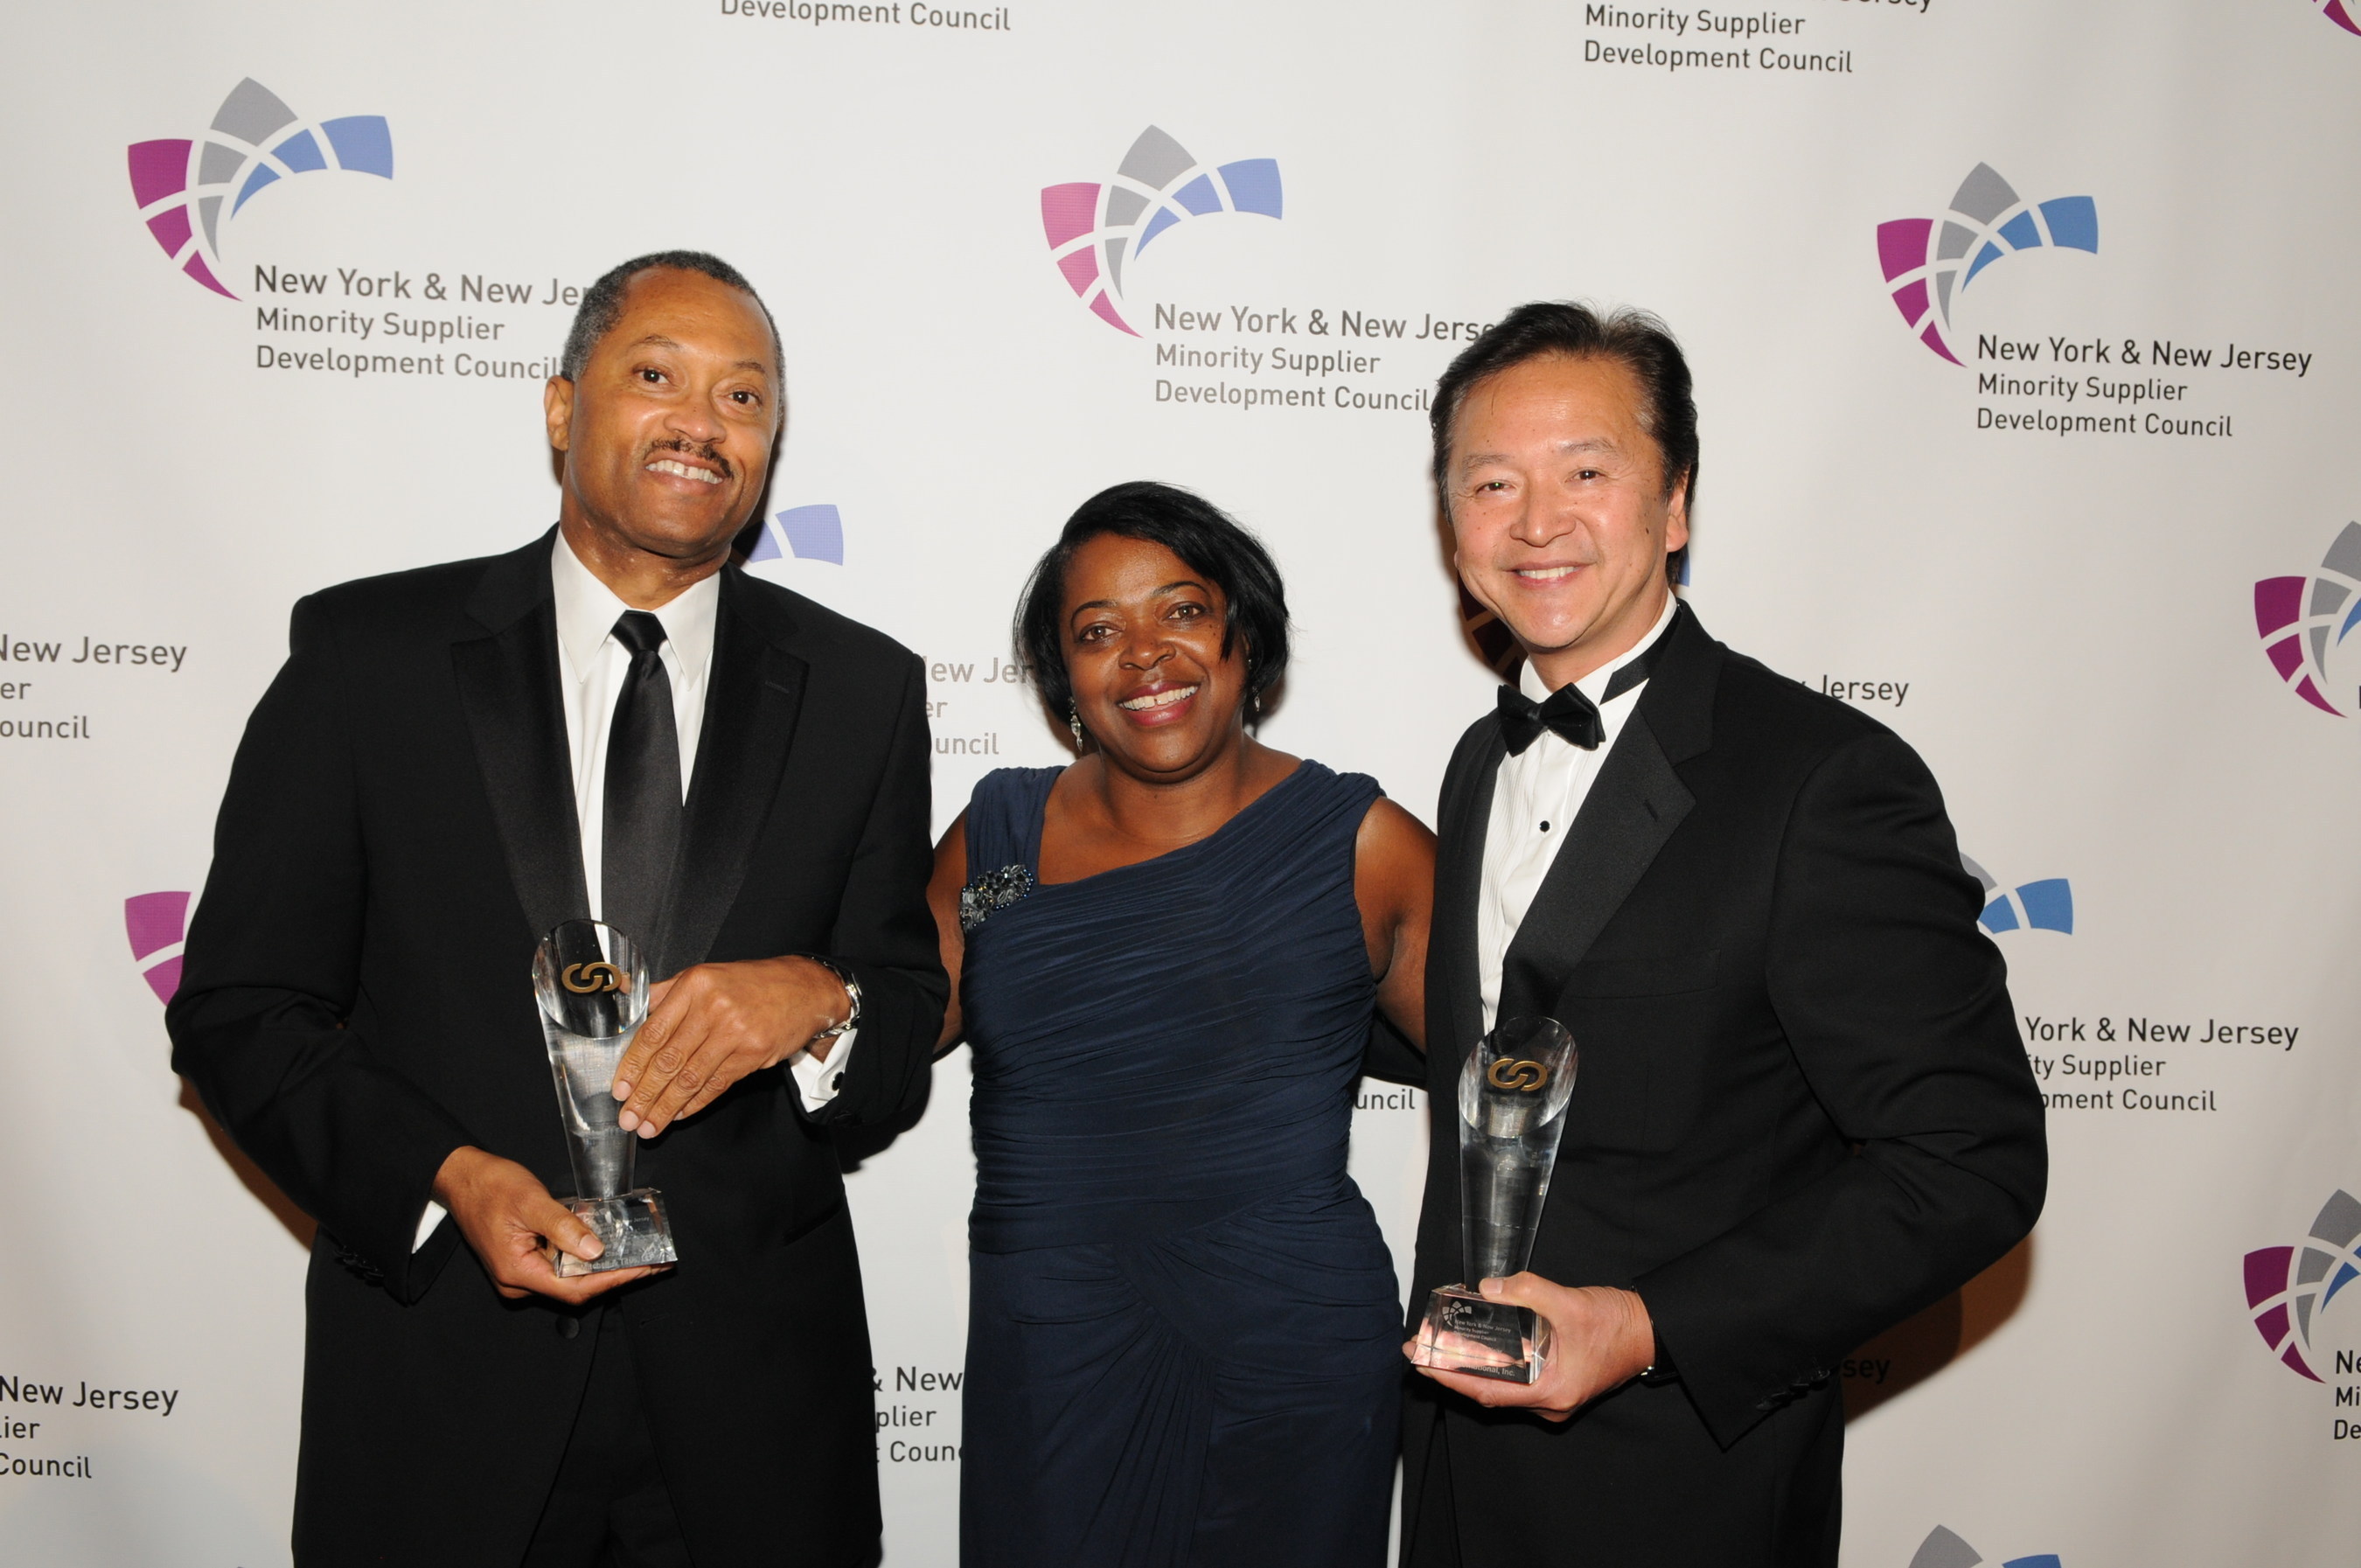 Left to Right: Anthony S. Kendall, Chairman and Chief Executive Officer,  Mitchell & Titus, LLP; Jeannie Maddox, Council Board Chair and Manager, Supplier Diversity and Global Procurement Strategies, Colgate-Palmolive Company; Donald Chu, President & CEO,  Tronex International Incorporated